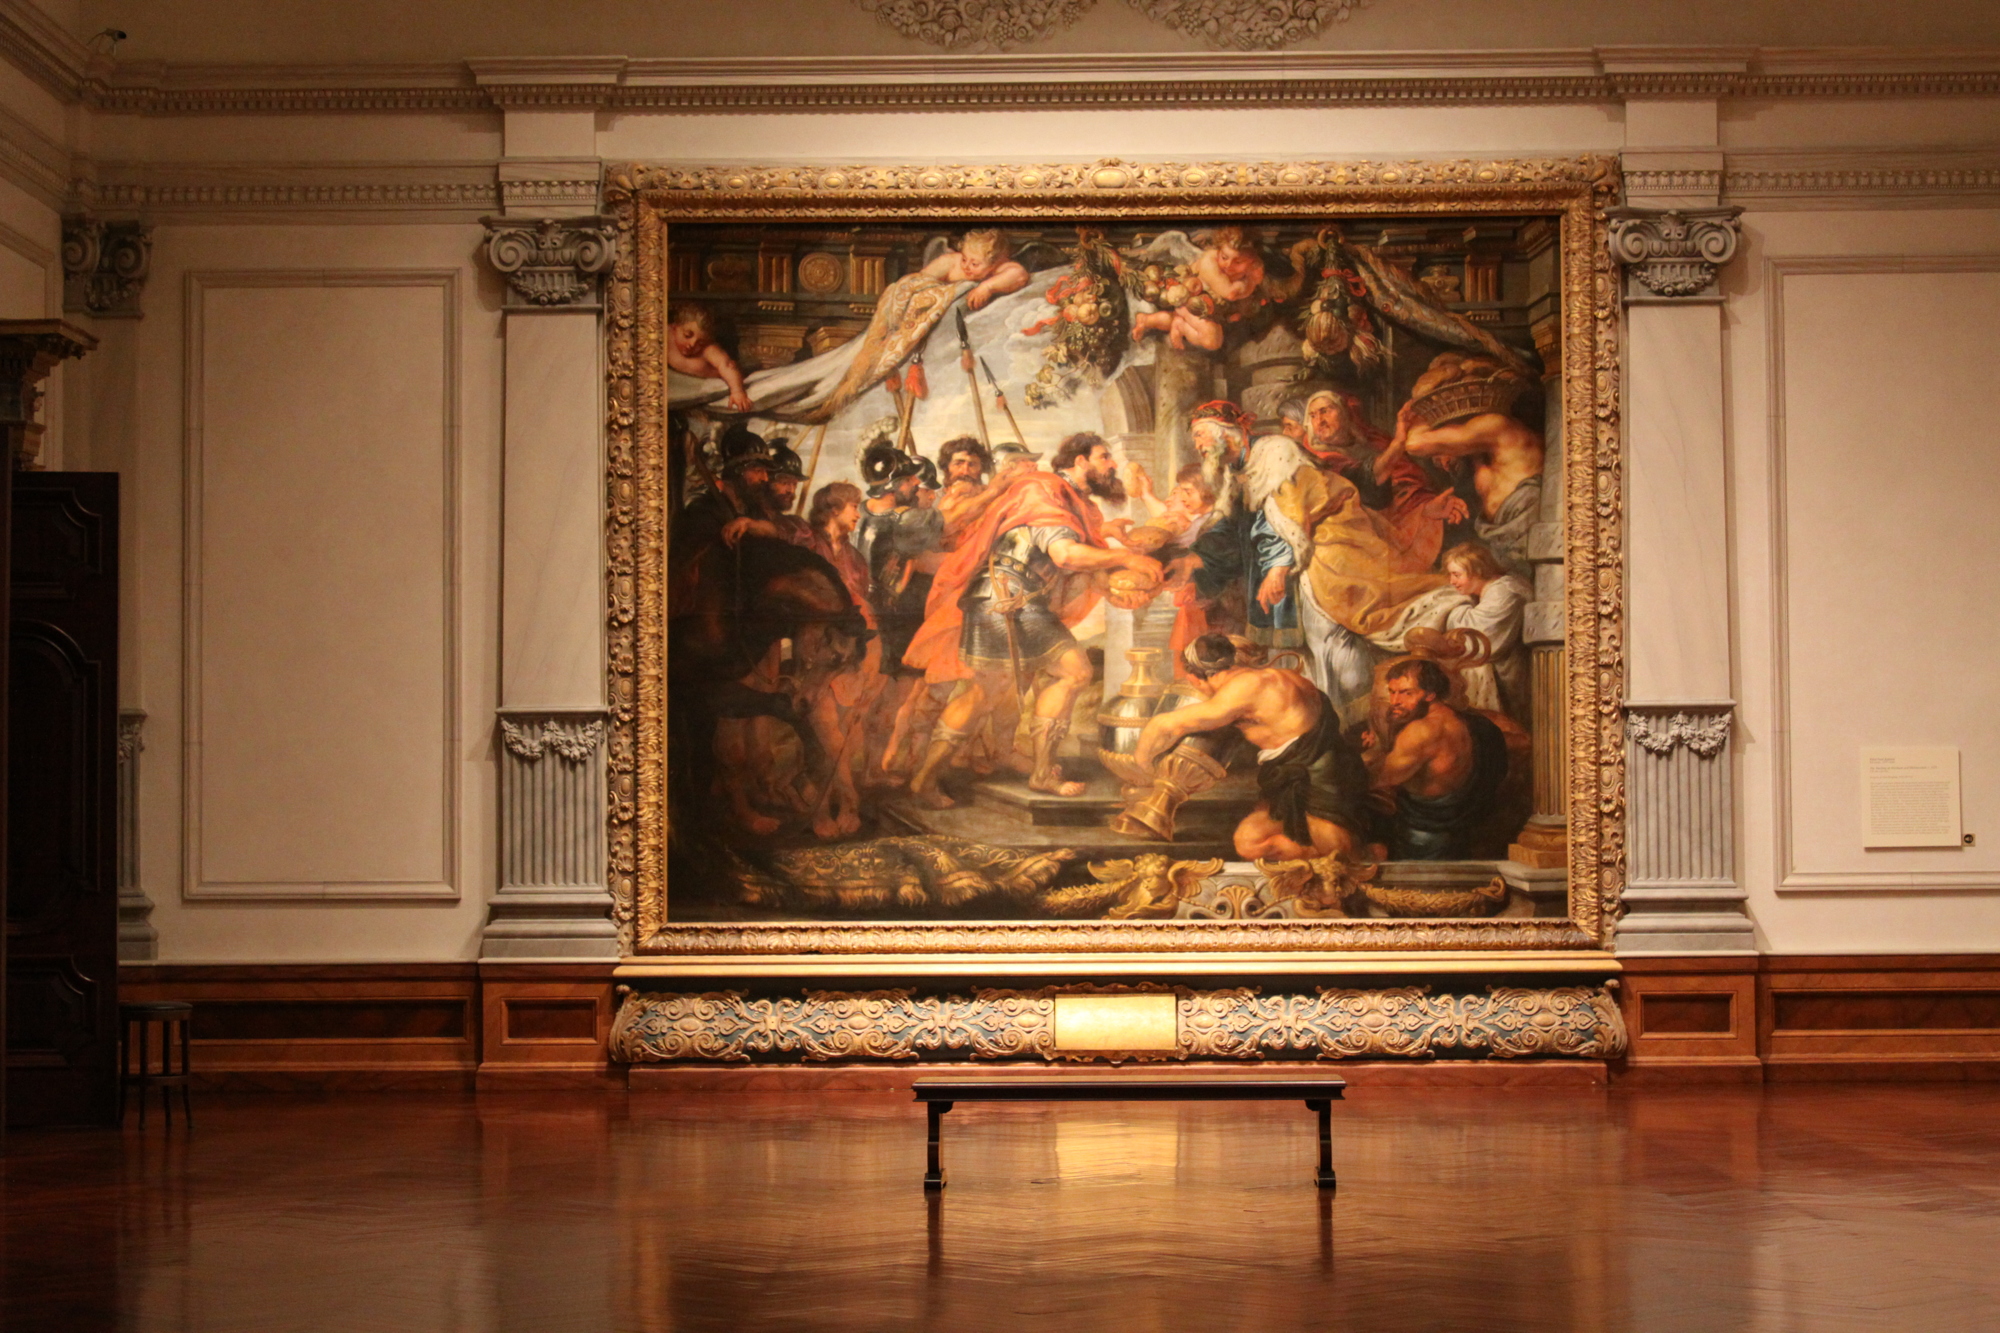 One of the attractions at the Ringling Museum is the John and Mable Museum of Art.